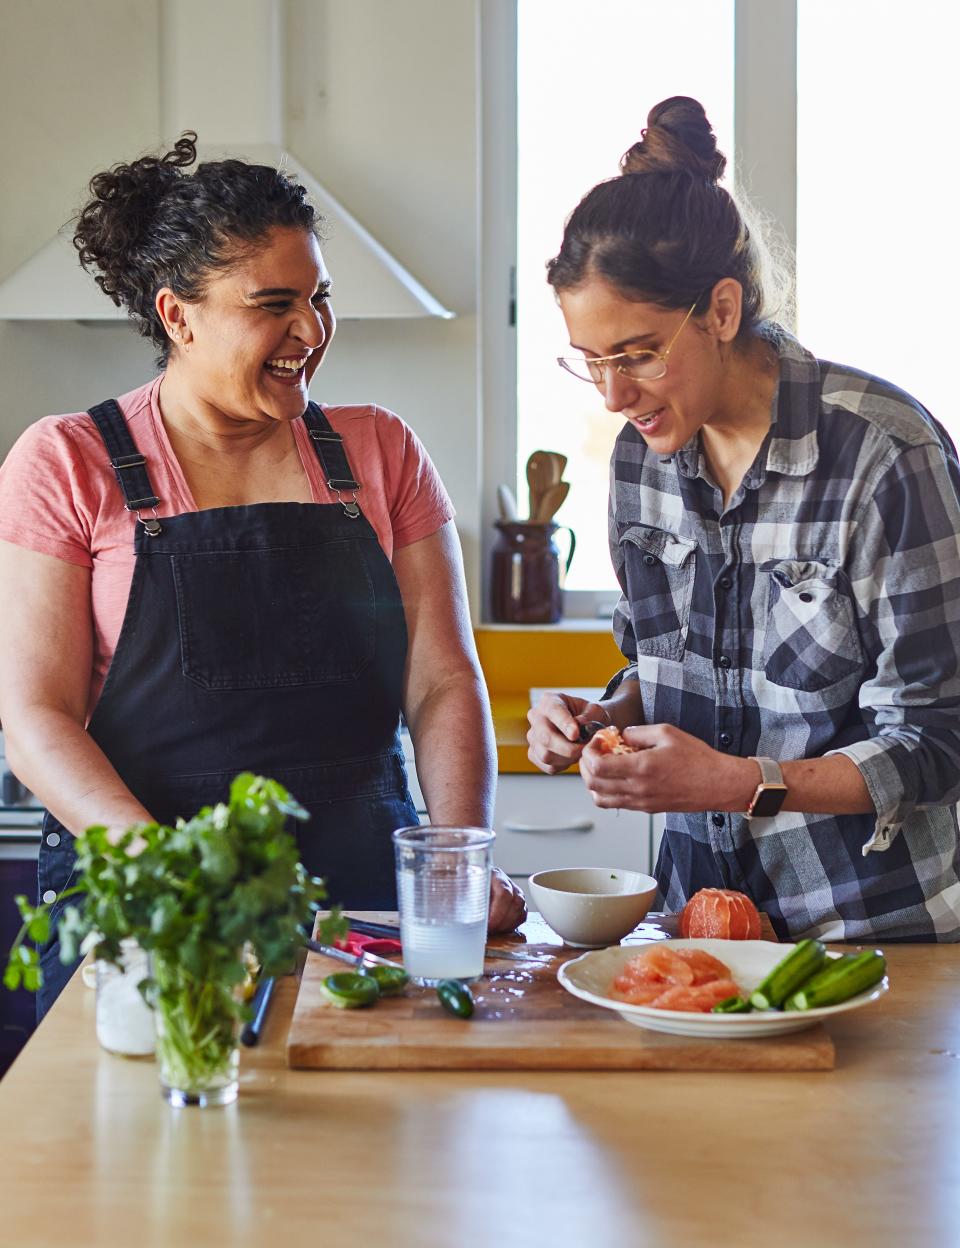 Nosrat has built her career on helping people feel more comfortable in the kitchen.